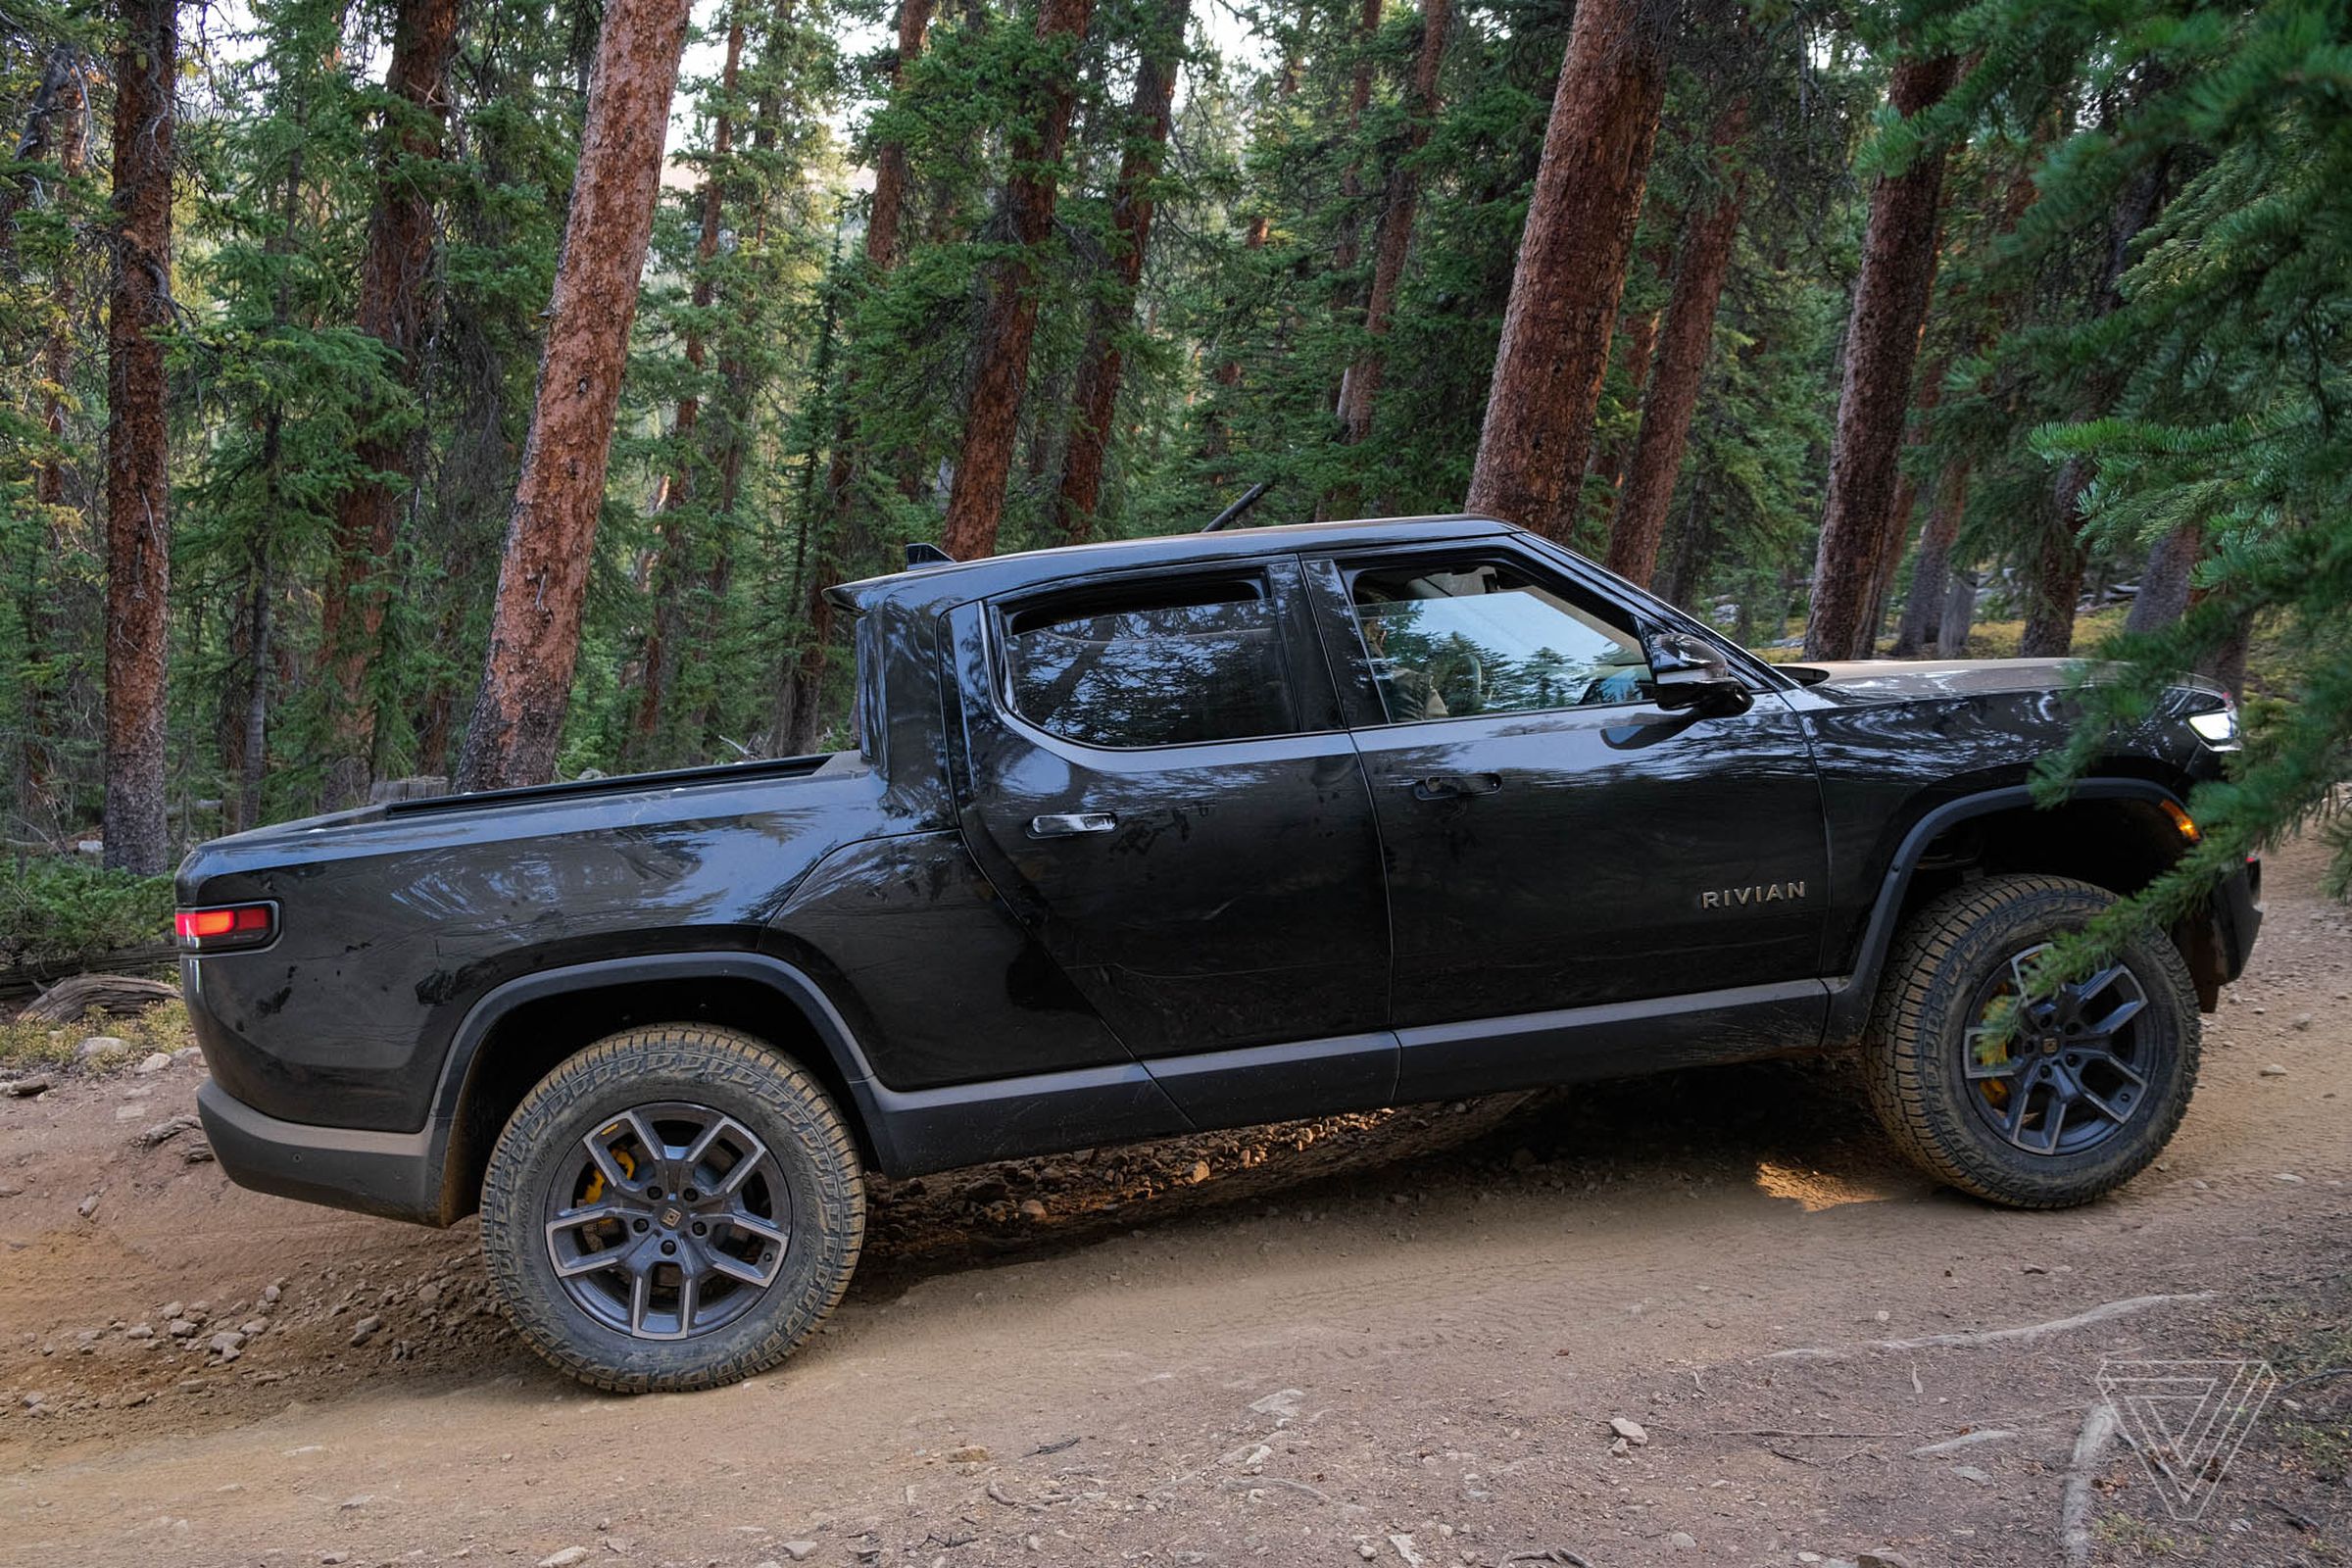 The Rivian R1T in what may be its natural habitat.